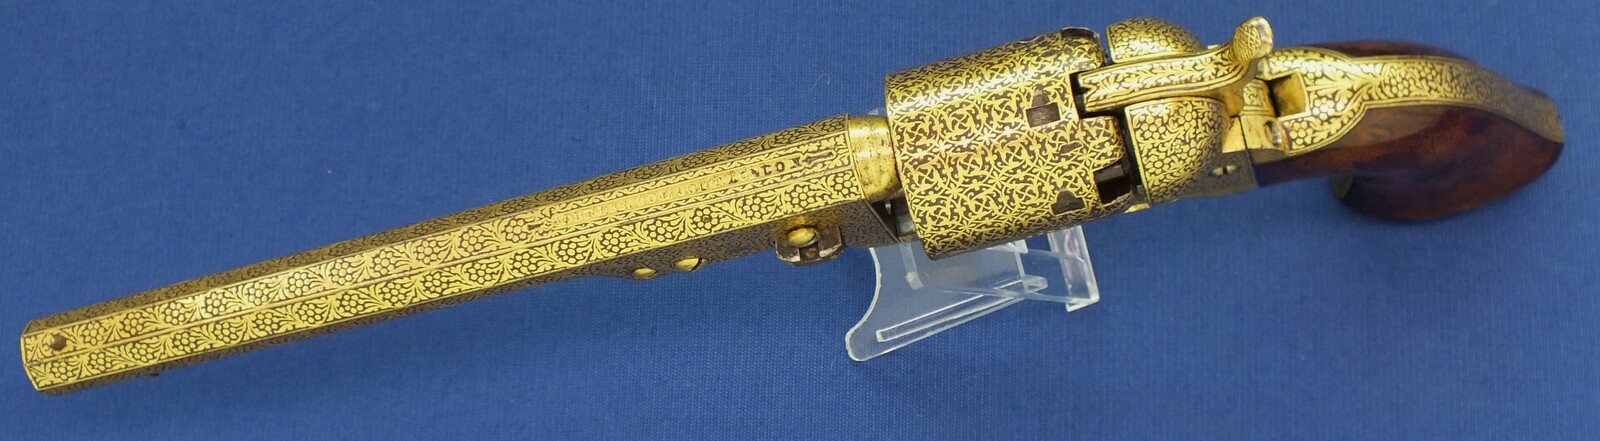 A fine antique cased exhibition Quality Gold Damascened London Colt Navy Model 1851 6 shot percussion revolver. .36 caliber. 7,5 inch barrel with London Colt address. In very good condition. Price 26.500 euro